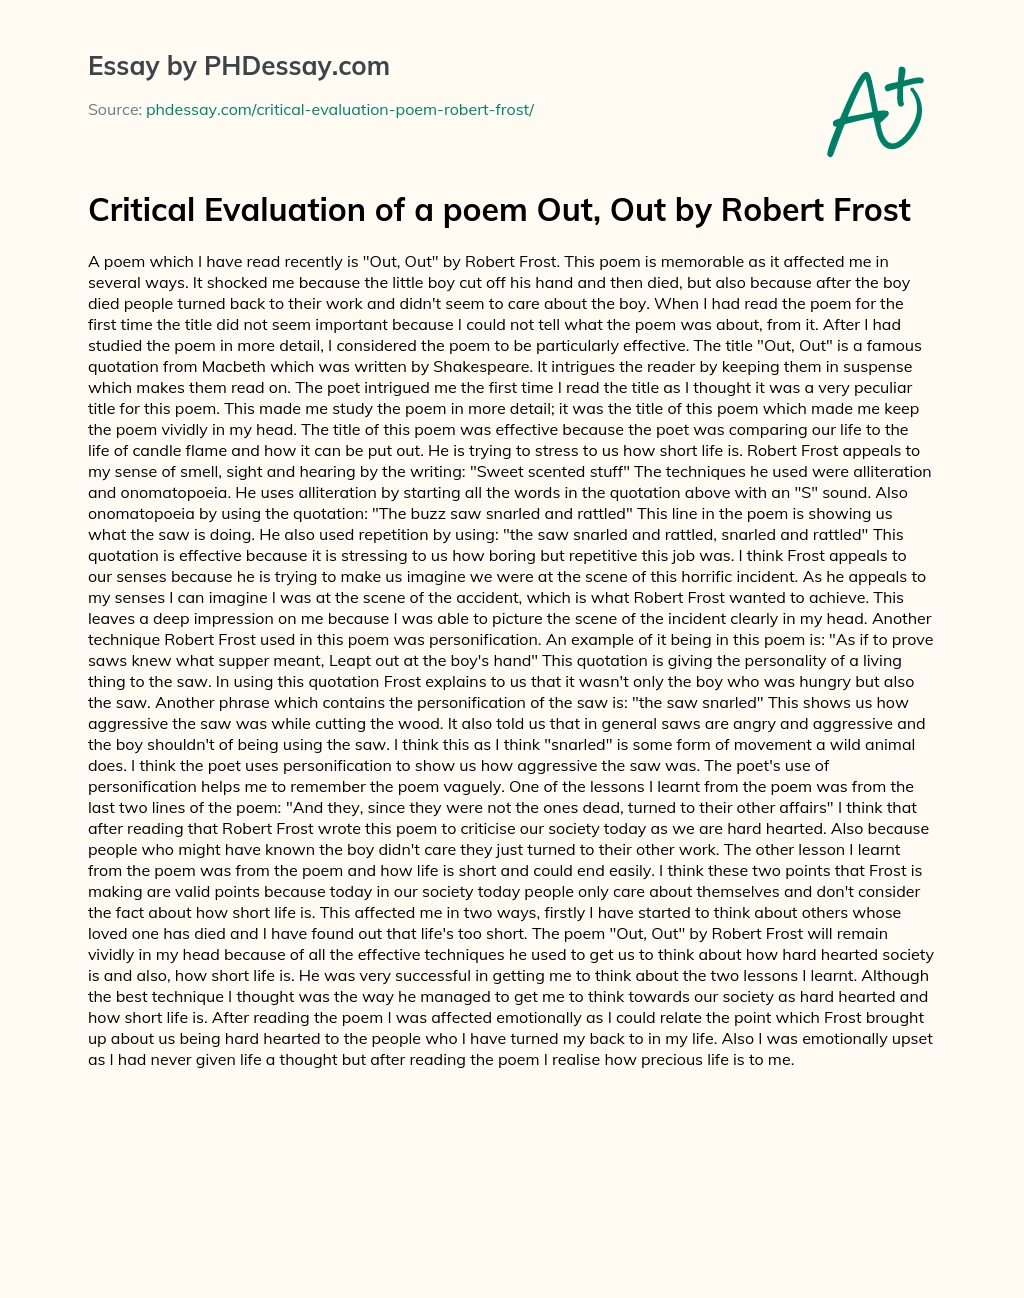 Critical Evaluation of a poem Out, Out by Robert Frost essay